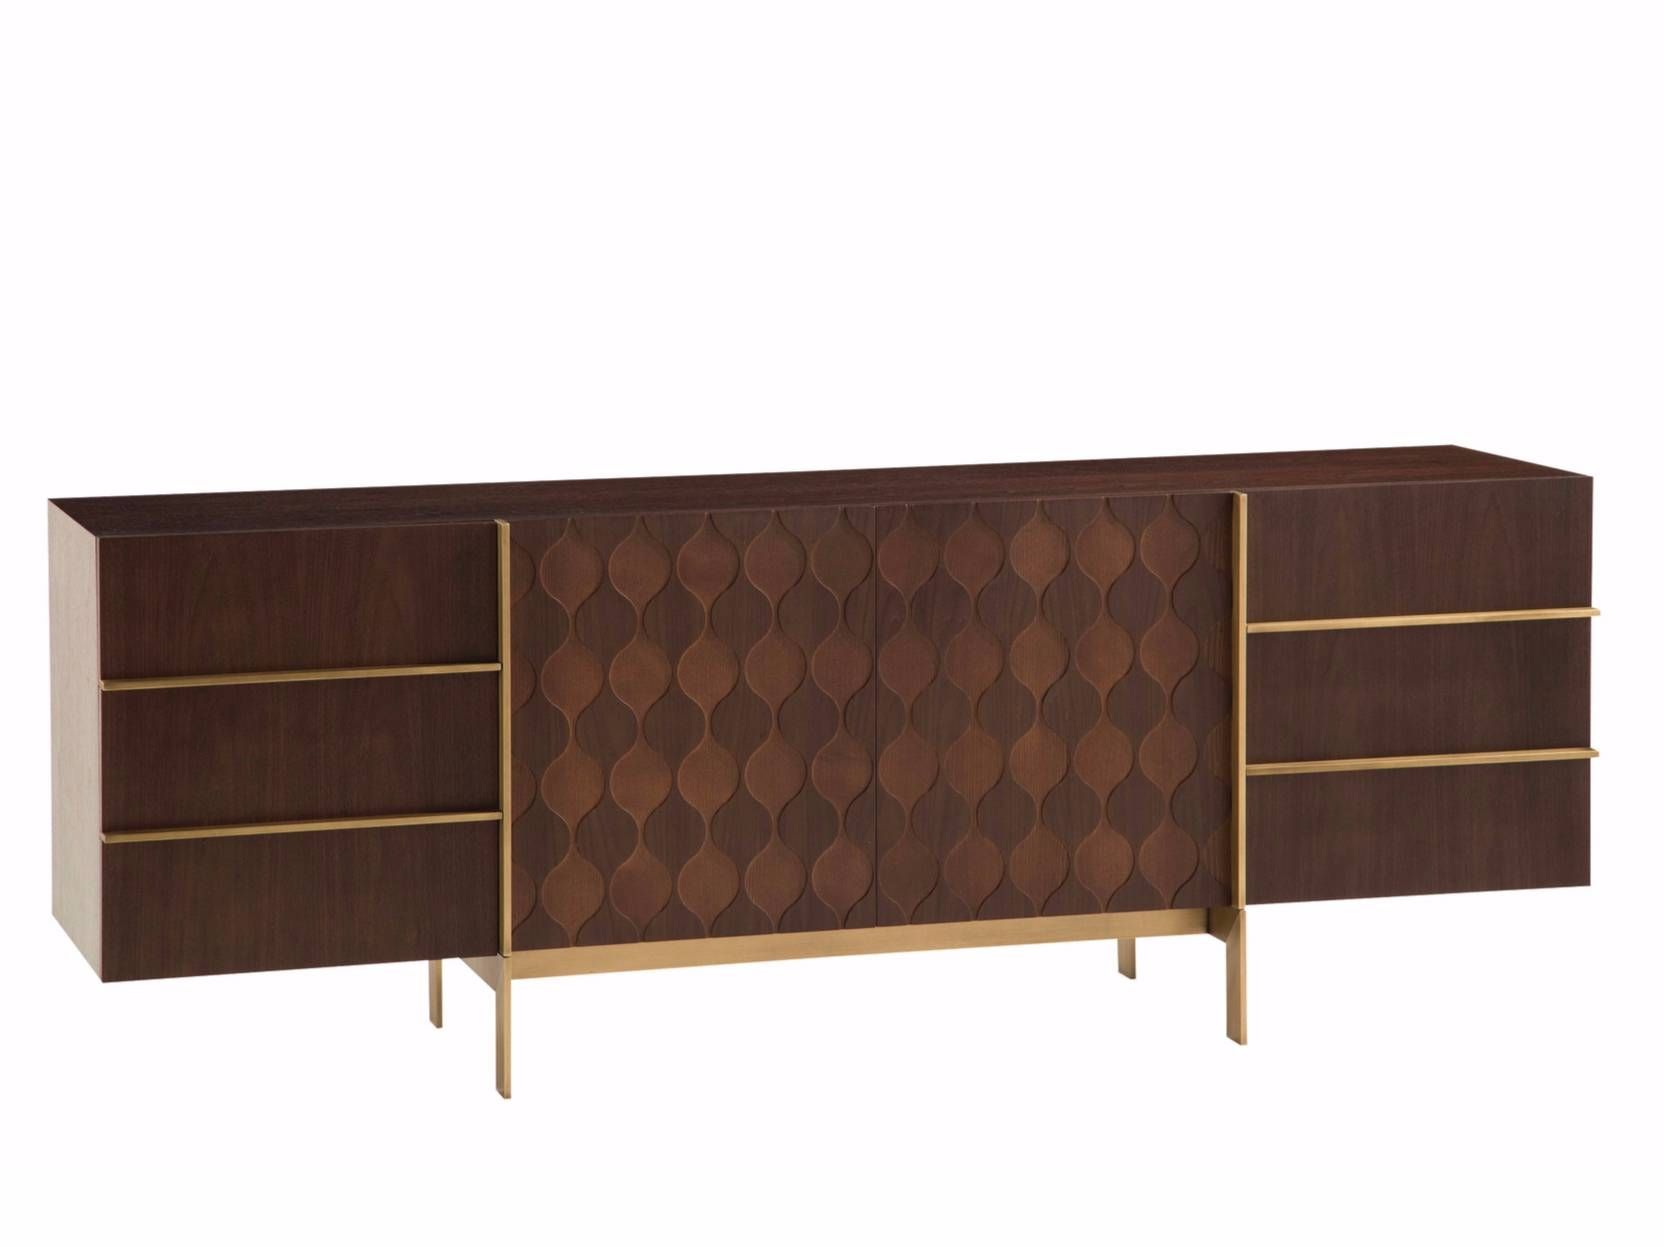 Repertoire | Sideboardroche Bobois With Regard To 2018 Roche Bobois Sideboards (View 2 of 15)